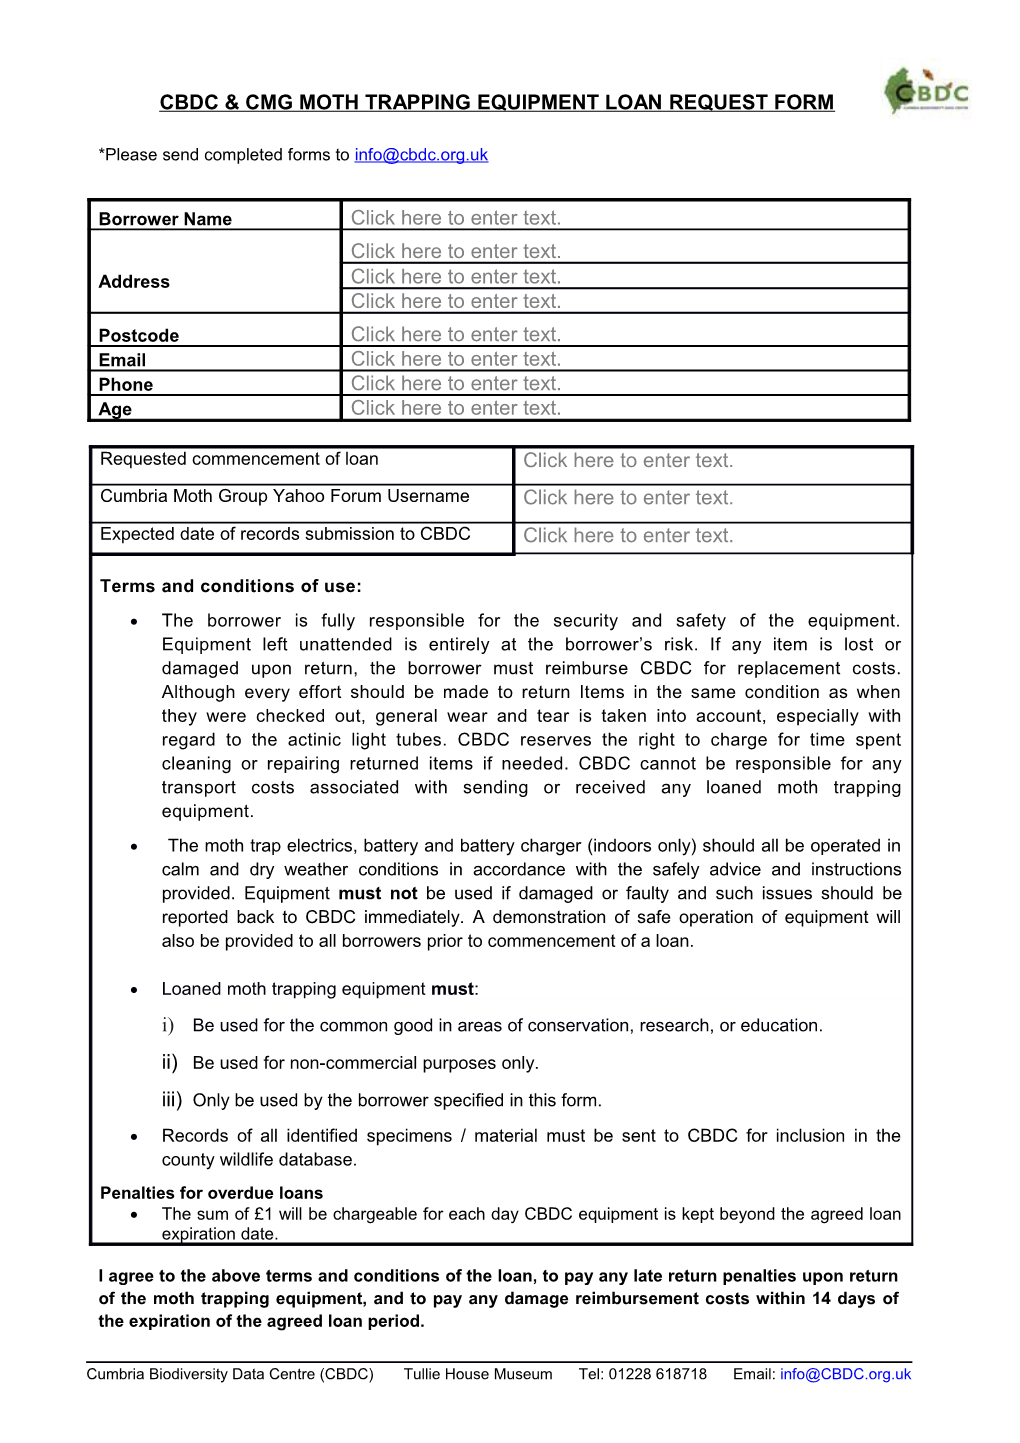 CBDC & CMG Moth Trapping Equipment Loan Request Form